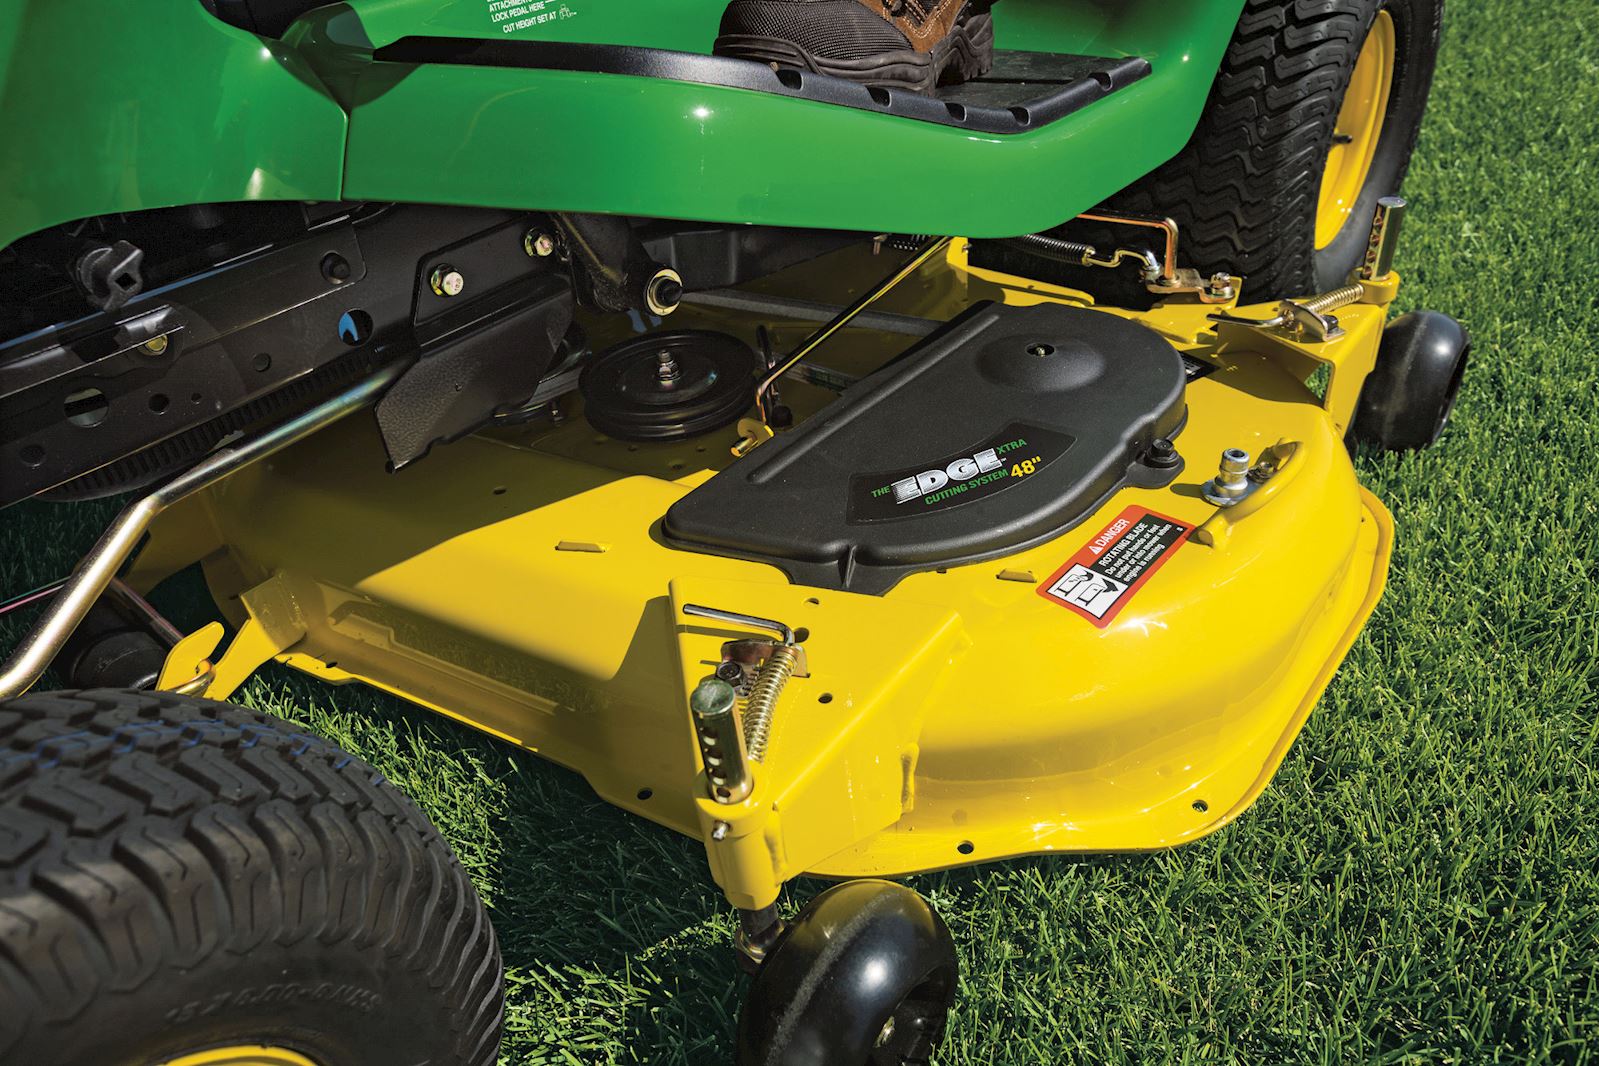 How To Level A Mower Deck John Deere Select Series Lawn Mowers ...